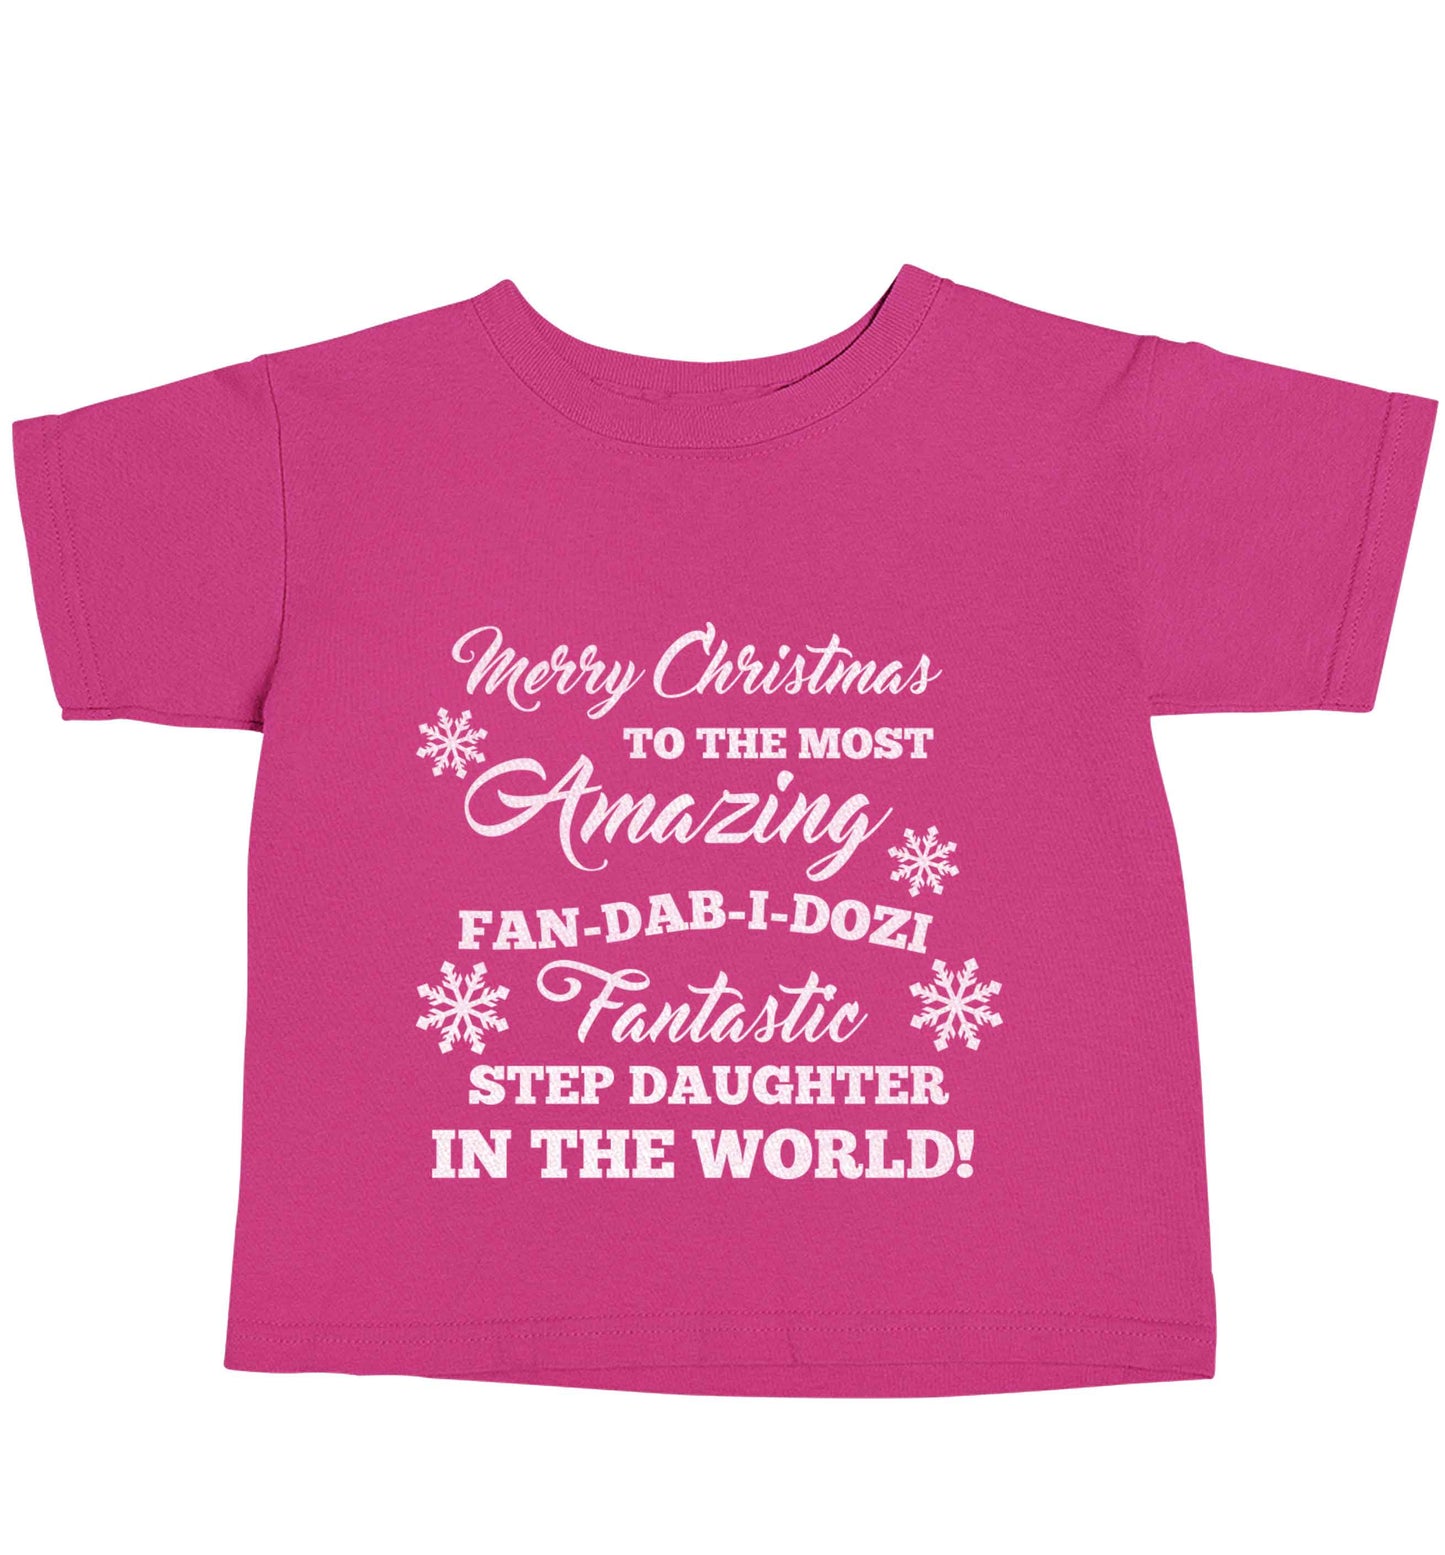 Merry Christmas to the most amazing fan-dab-i-dozi fantasic Step Daughter in the world pink baby toddler Tshirt 2 Years